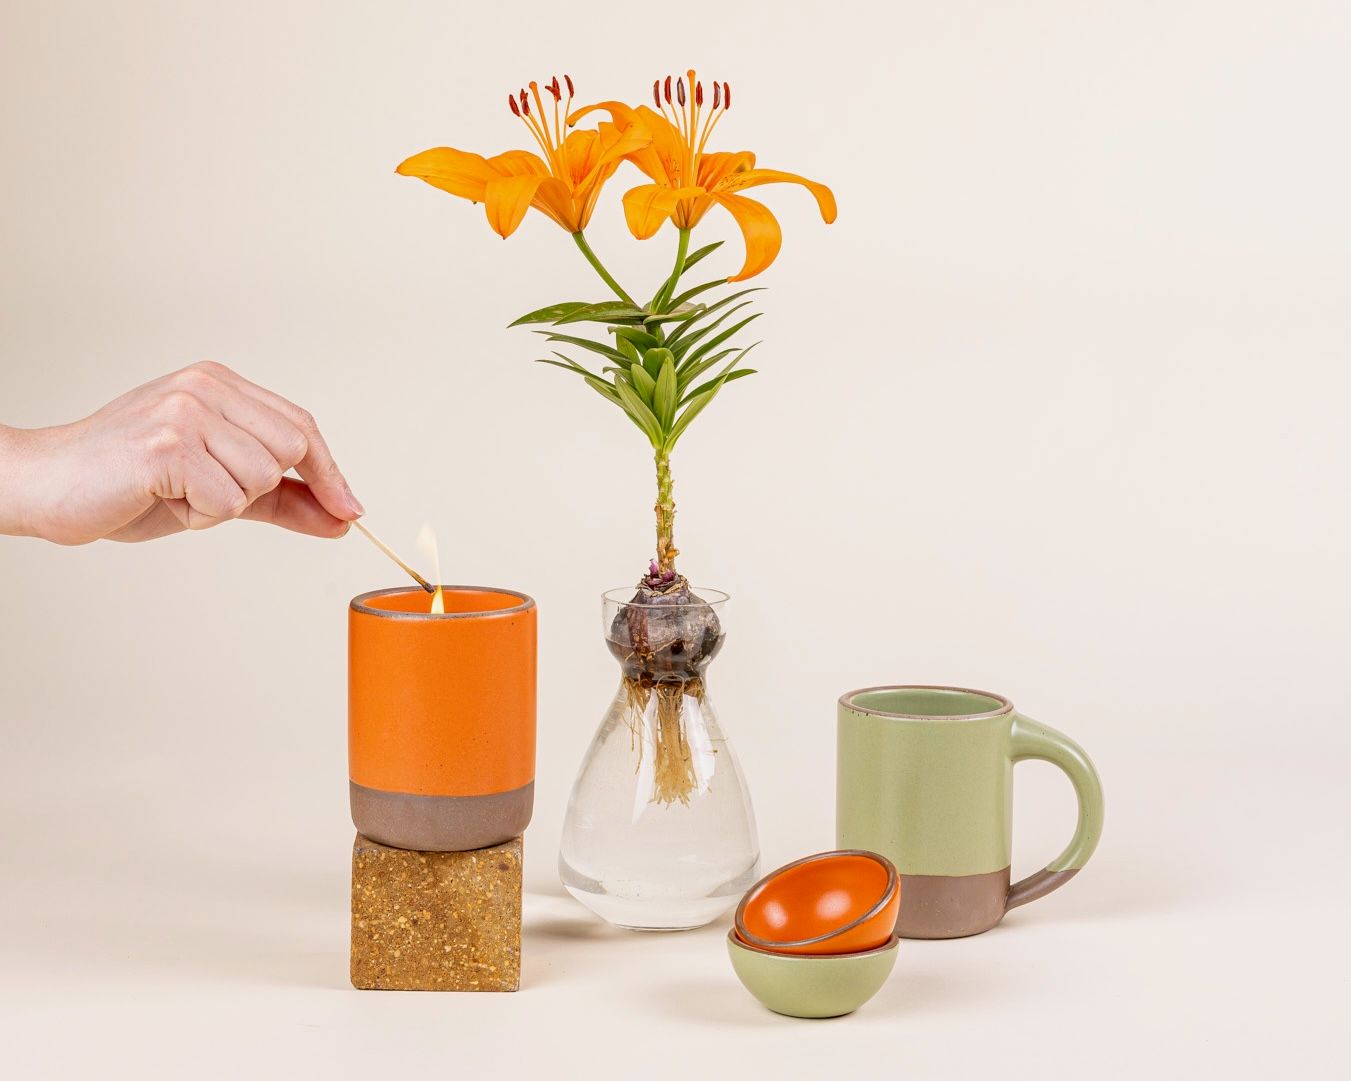 A hand lights a candle in a ceramic orange vessel. Nearby is a glass bulb vase, a sage green ceramic mug, and 2 tiny bowls in bold orange and sage green colors.